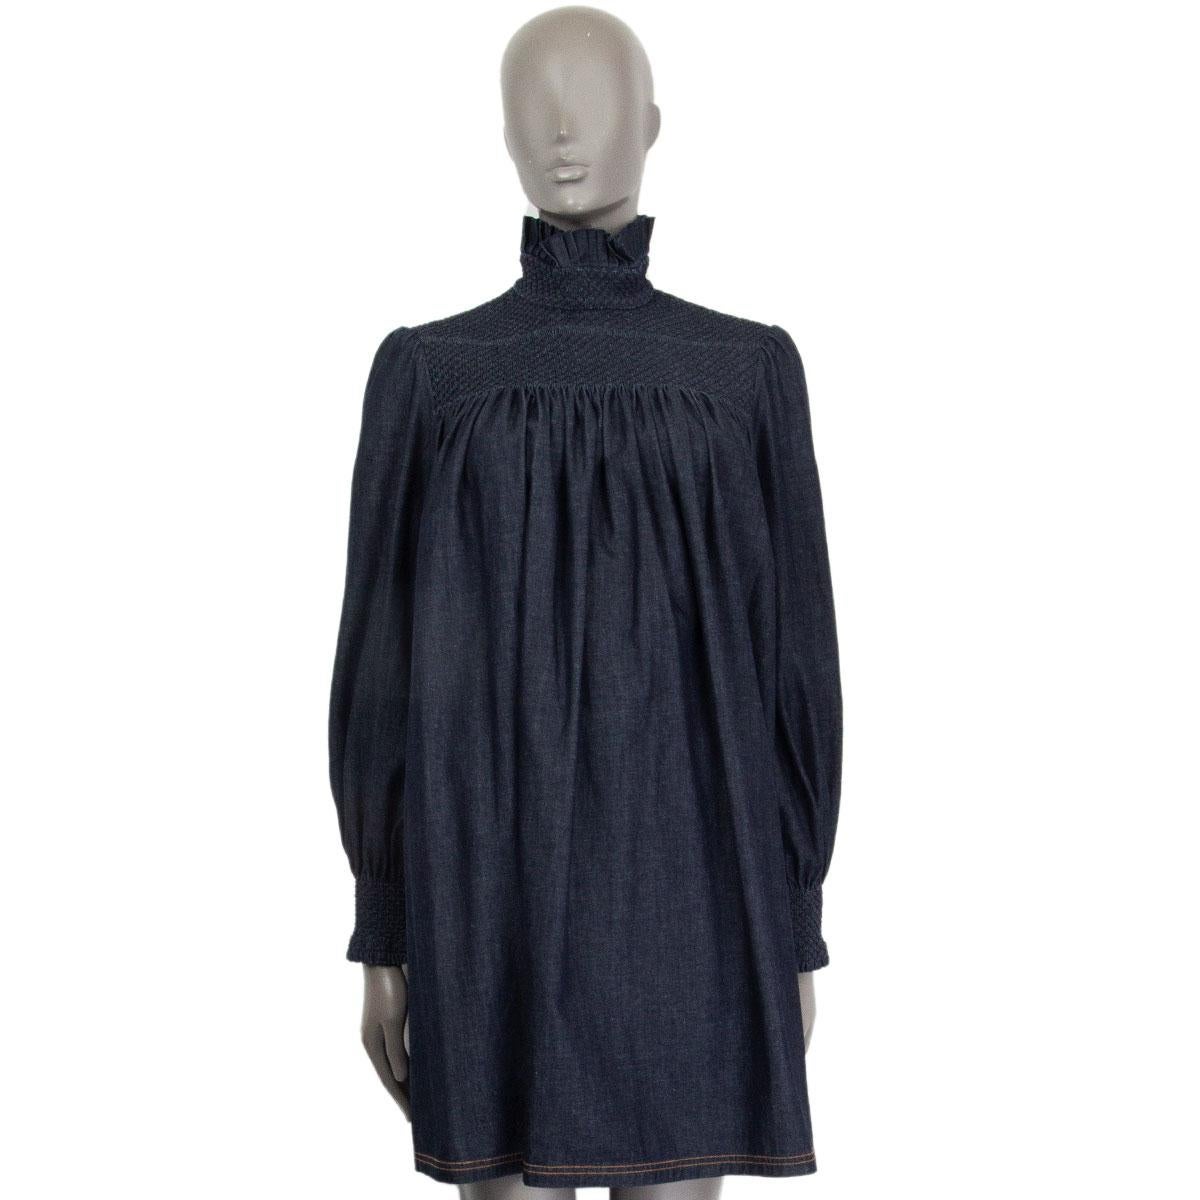 authentic Fendi oversized long sleeve denim dress in indigo cotton (100%). Elastic ruffled shoulder part and cuffs. Two slit-pockets on the side and pleated stand-up collar. Has been worn once and is in excellent condition. 

Tag Size 42
Size